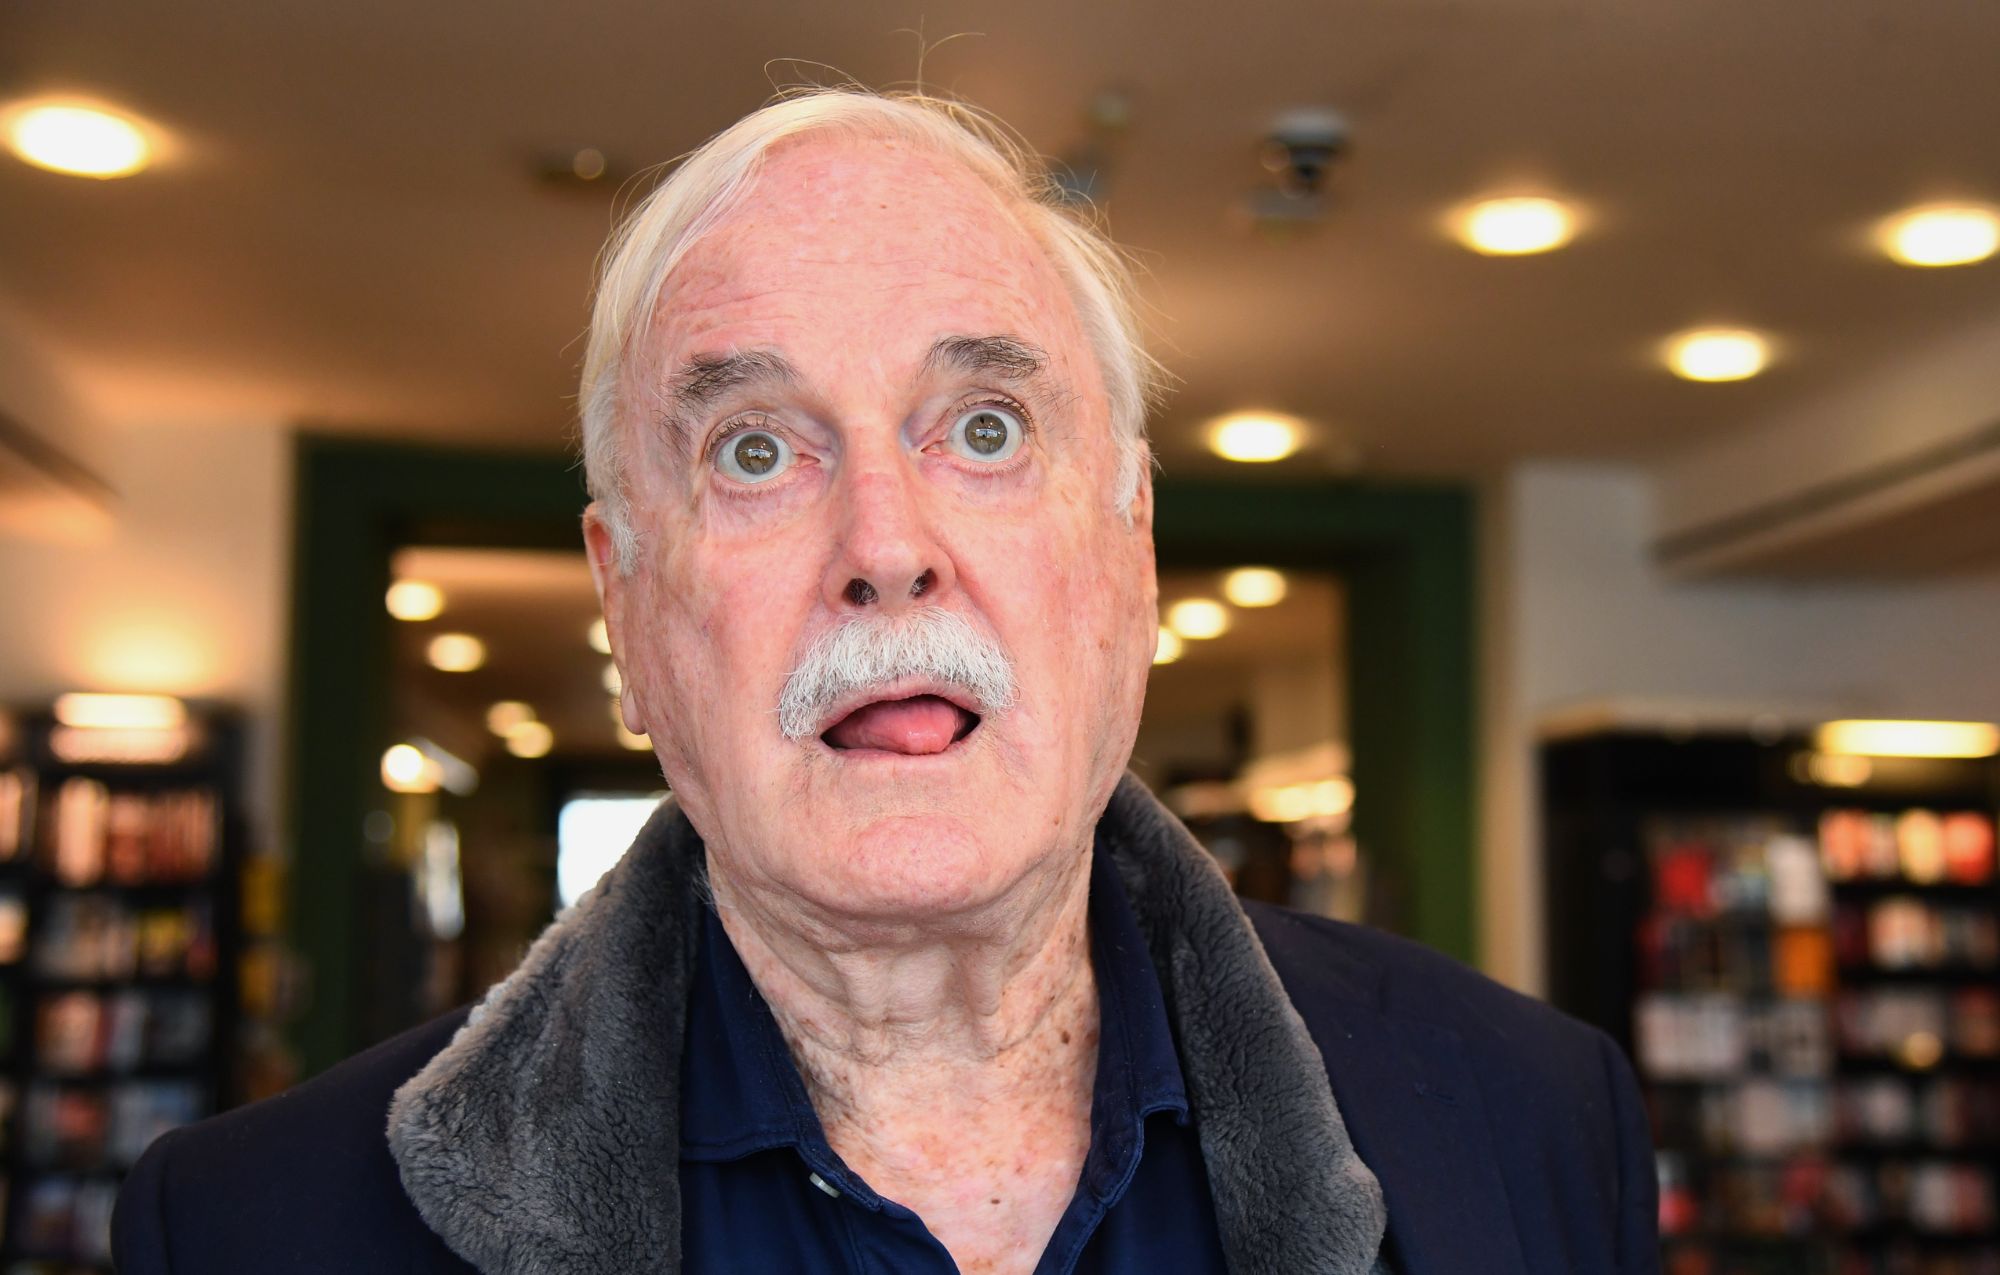 John Cleese has said he won't bring the reboot of his hit show back to the BBC